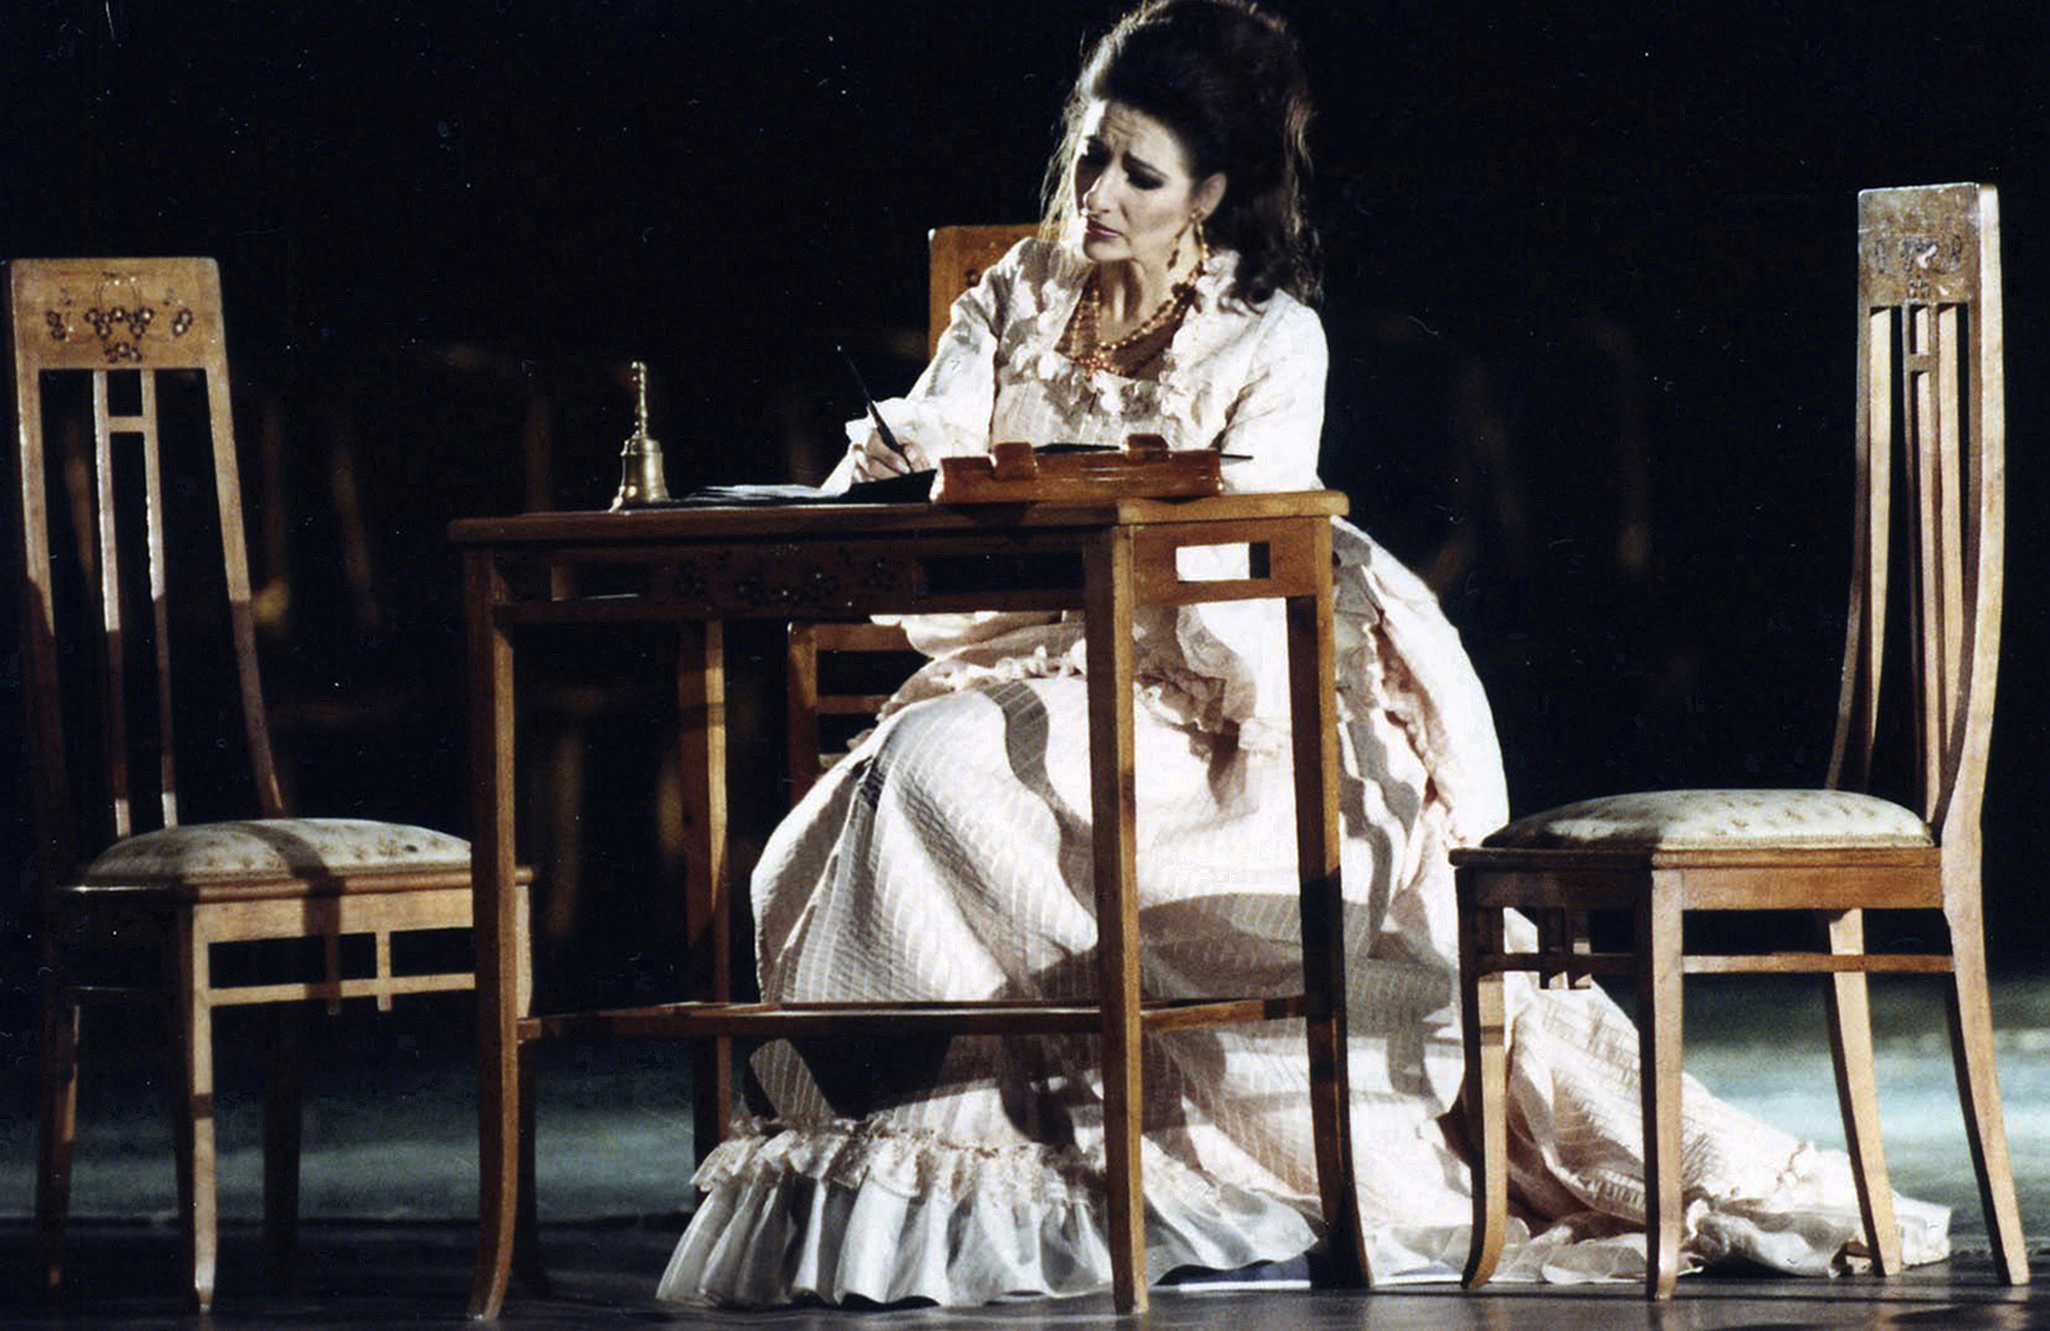 Lucia Aliberti⚘Opera⚘"La Traviata"⚘Nagoya⚘Co-Production with the Rome Opera House⚘Japan Tour⚘Directed by Henning Brockhaus⚘On Stage⚘:http://www.luciaaliberti.it #luciaaliberti #opera #latraviata #opera #nagoya #coproductionwithromeoperahouse #japantour #henningbrockhaus #onstage